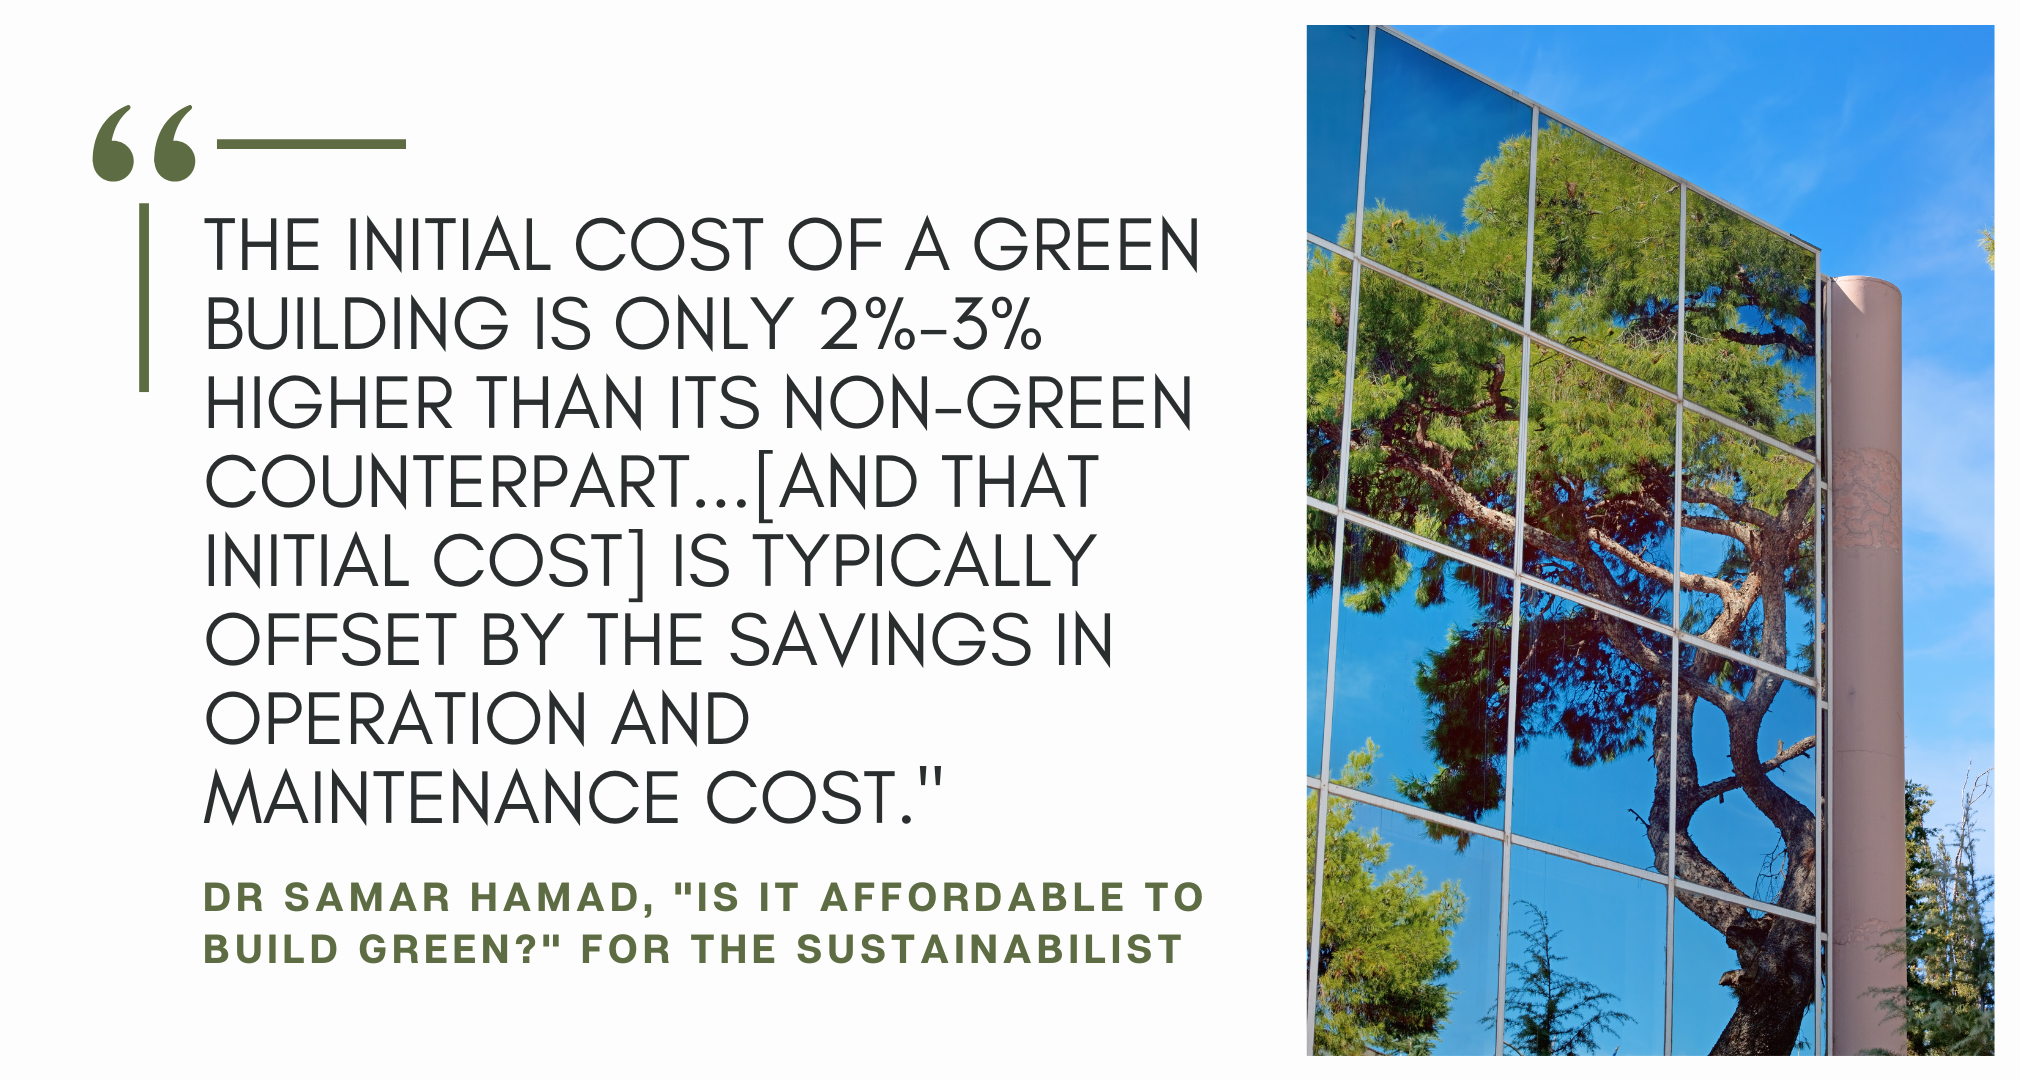 This has led to increased affordability and availability of green building materials and equipment